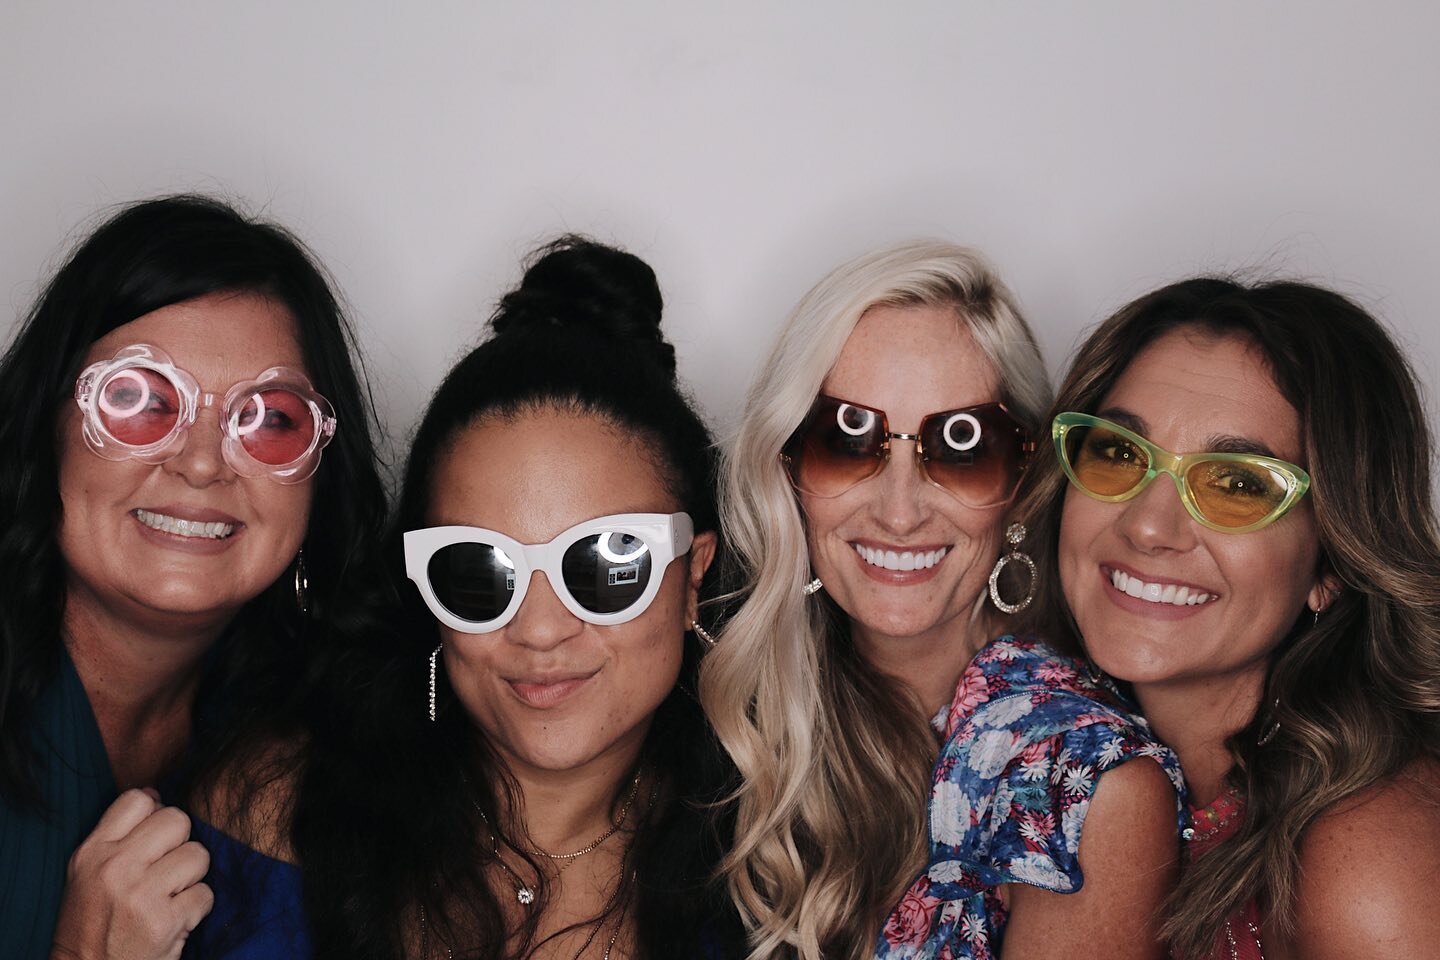 Grab your girl gang and plan a galentine&rsquo;s party that would make Leslie Knope proud 😉 And of course we are here serving up all the photo booth fun to document such an important day 🥂